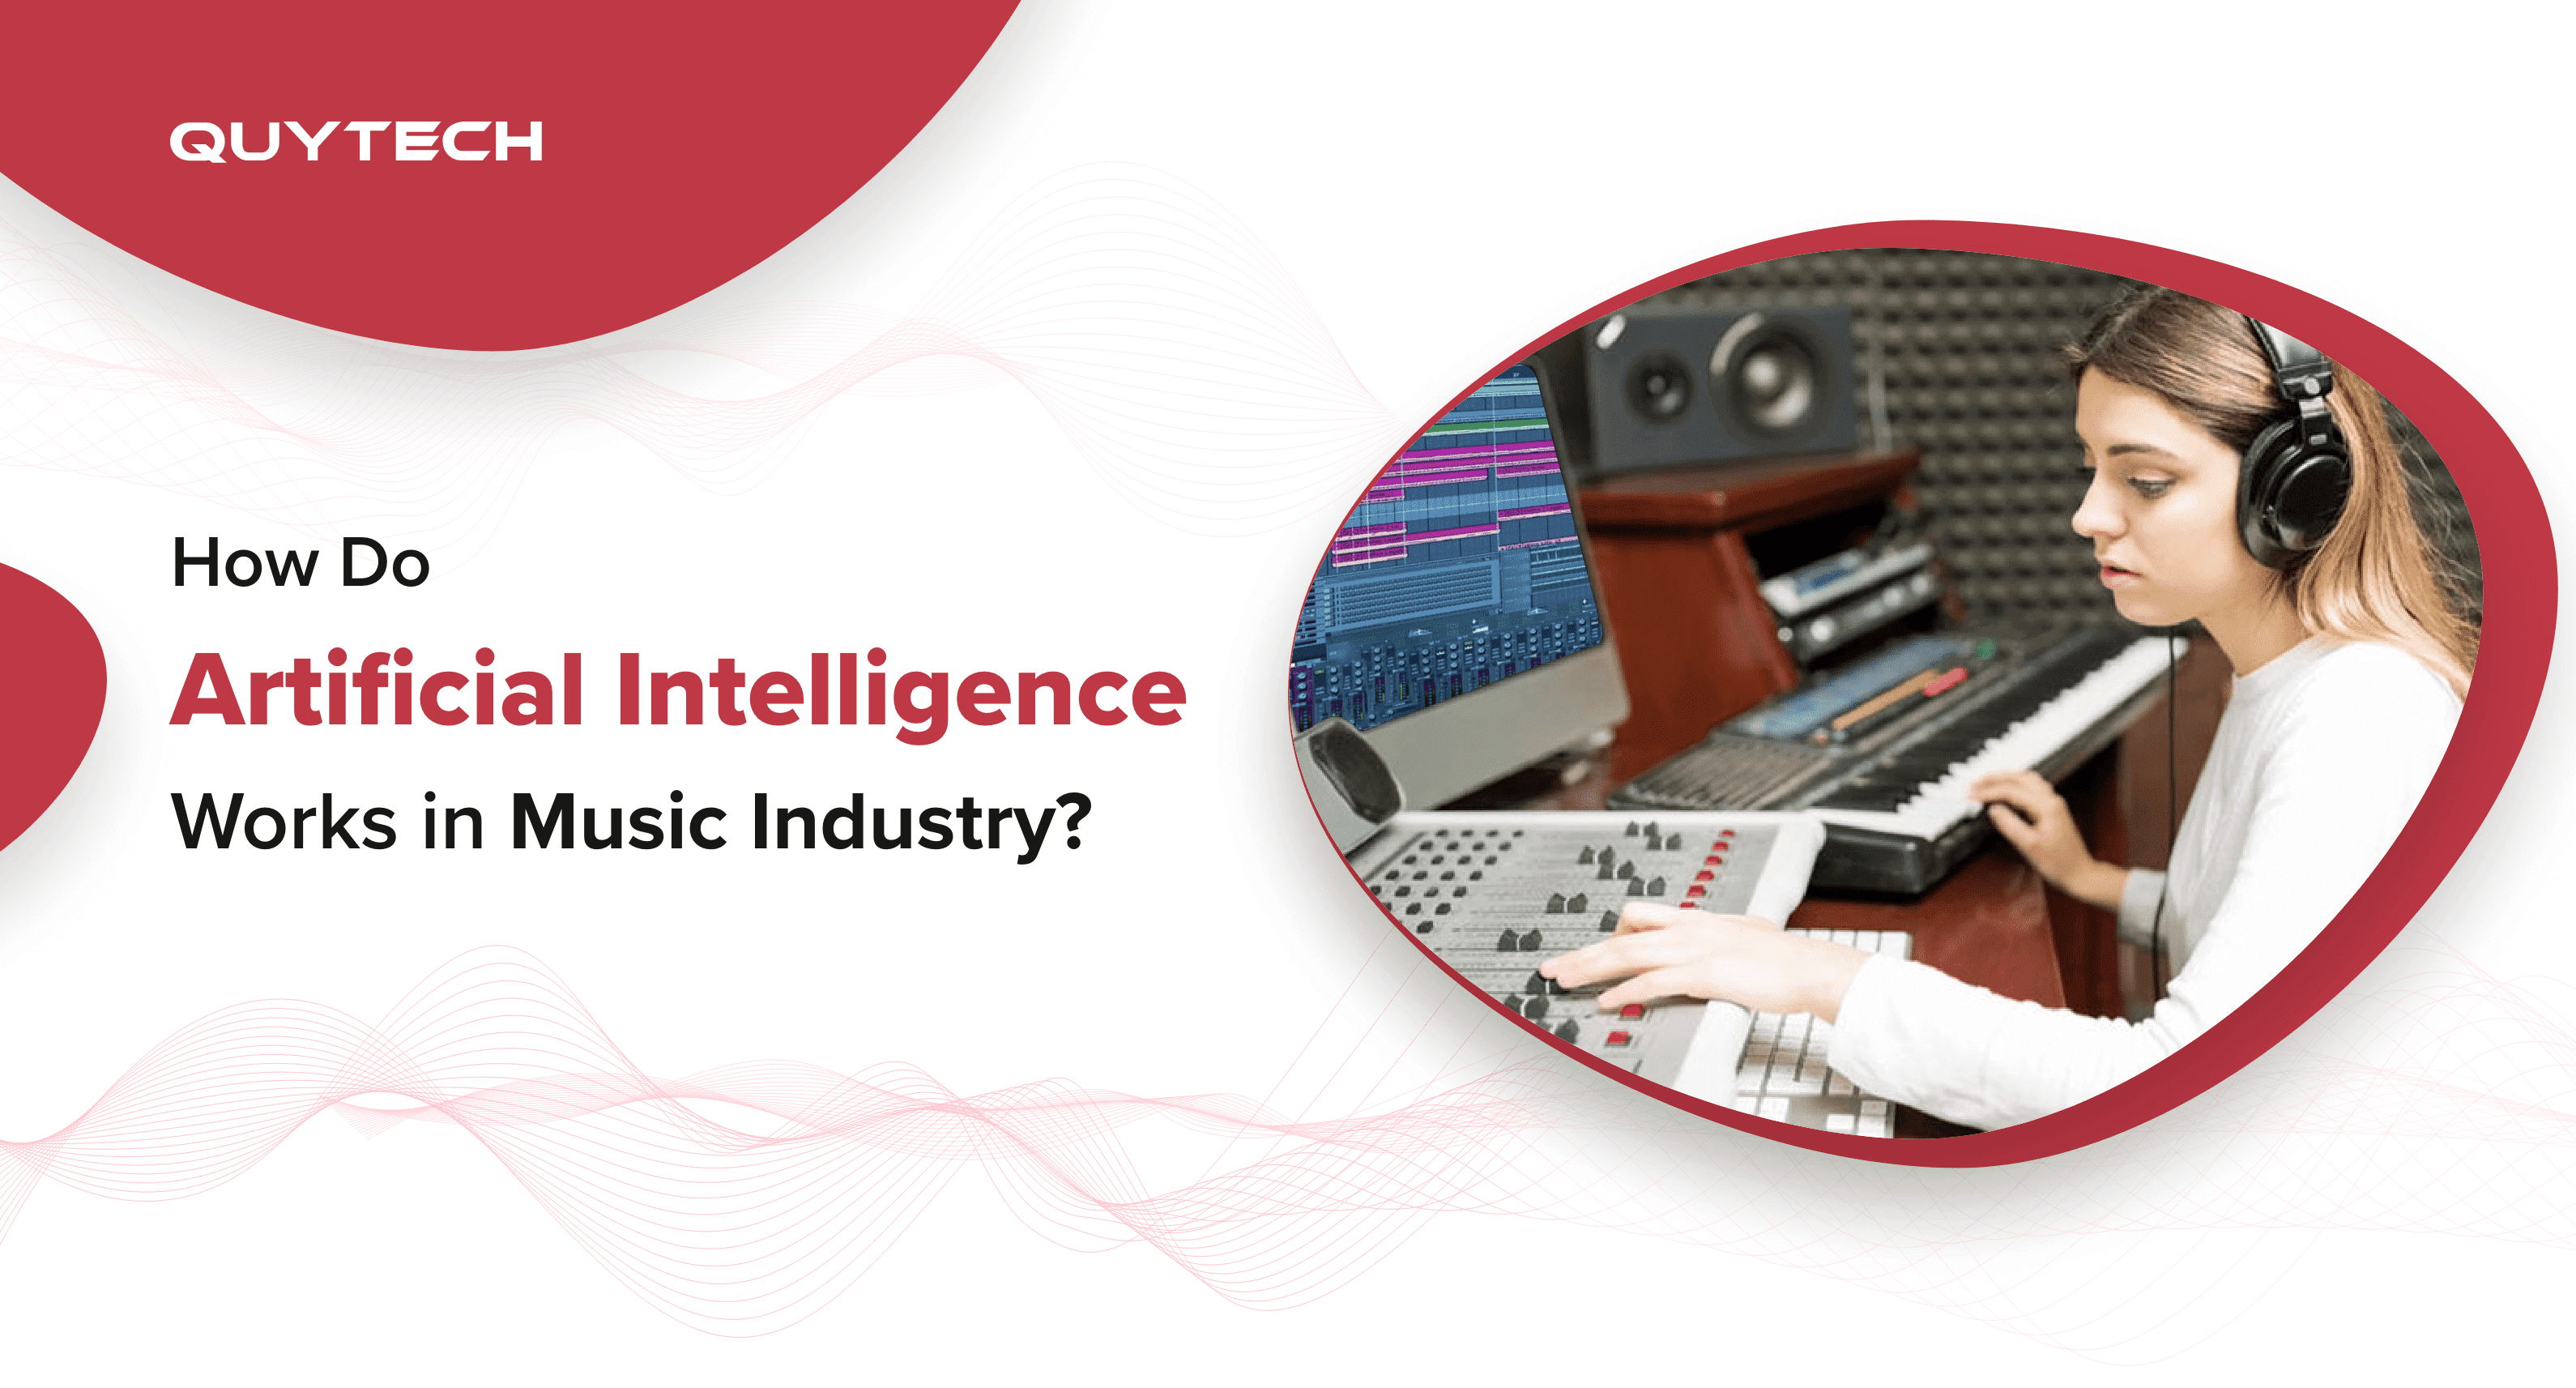 How Do Artificial Intelligence Works in Music Industry